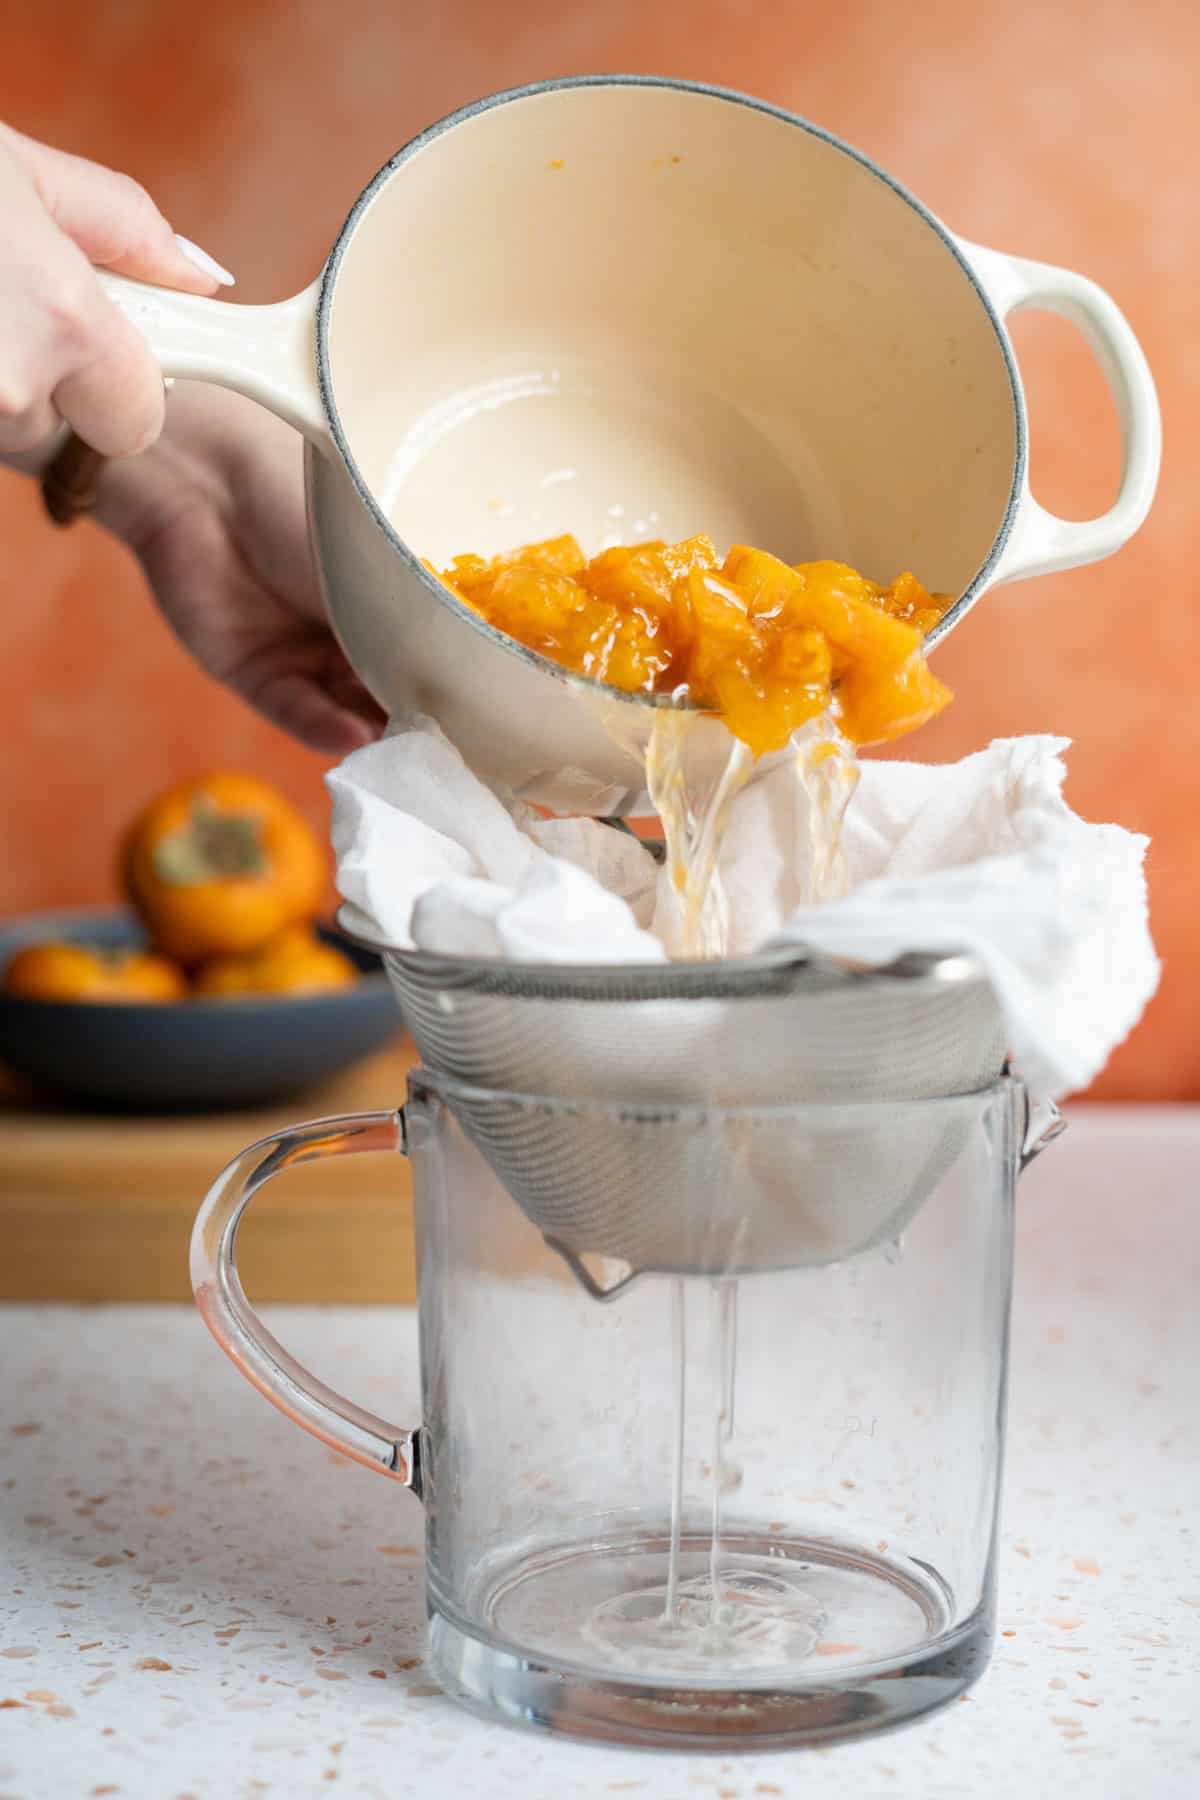 Straining persimmon simple syrup from a saucepan through a fine mesh sieve lined with cheesecloth.